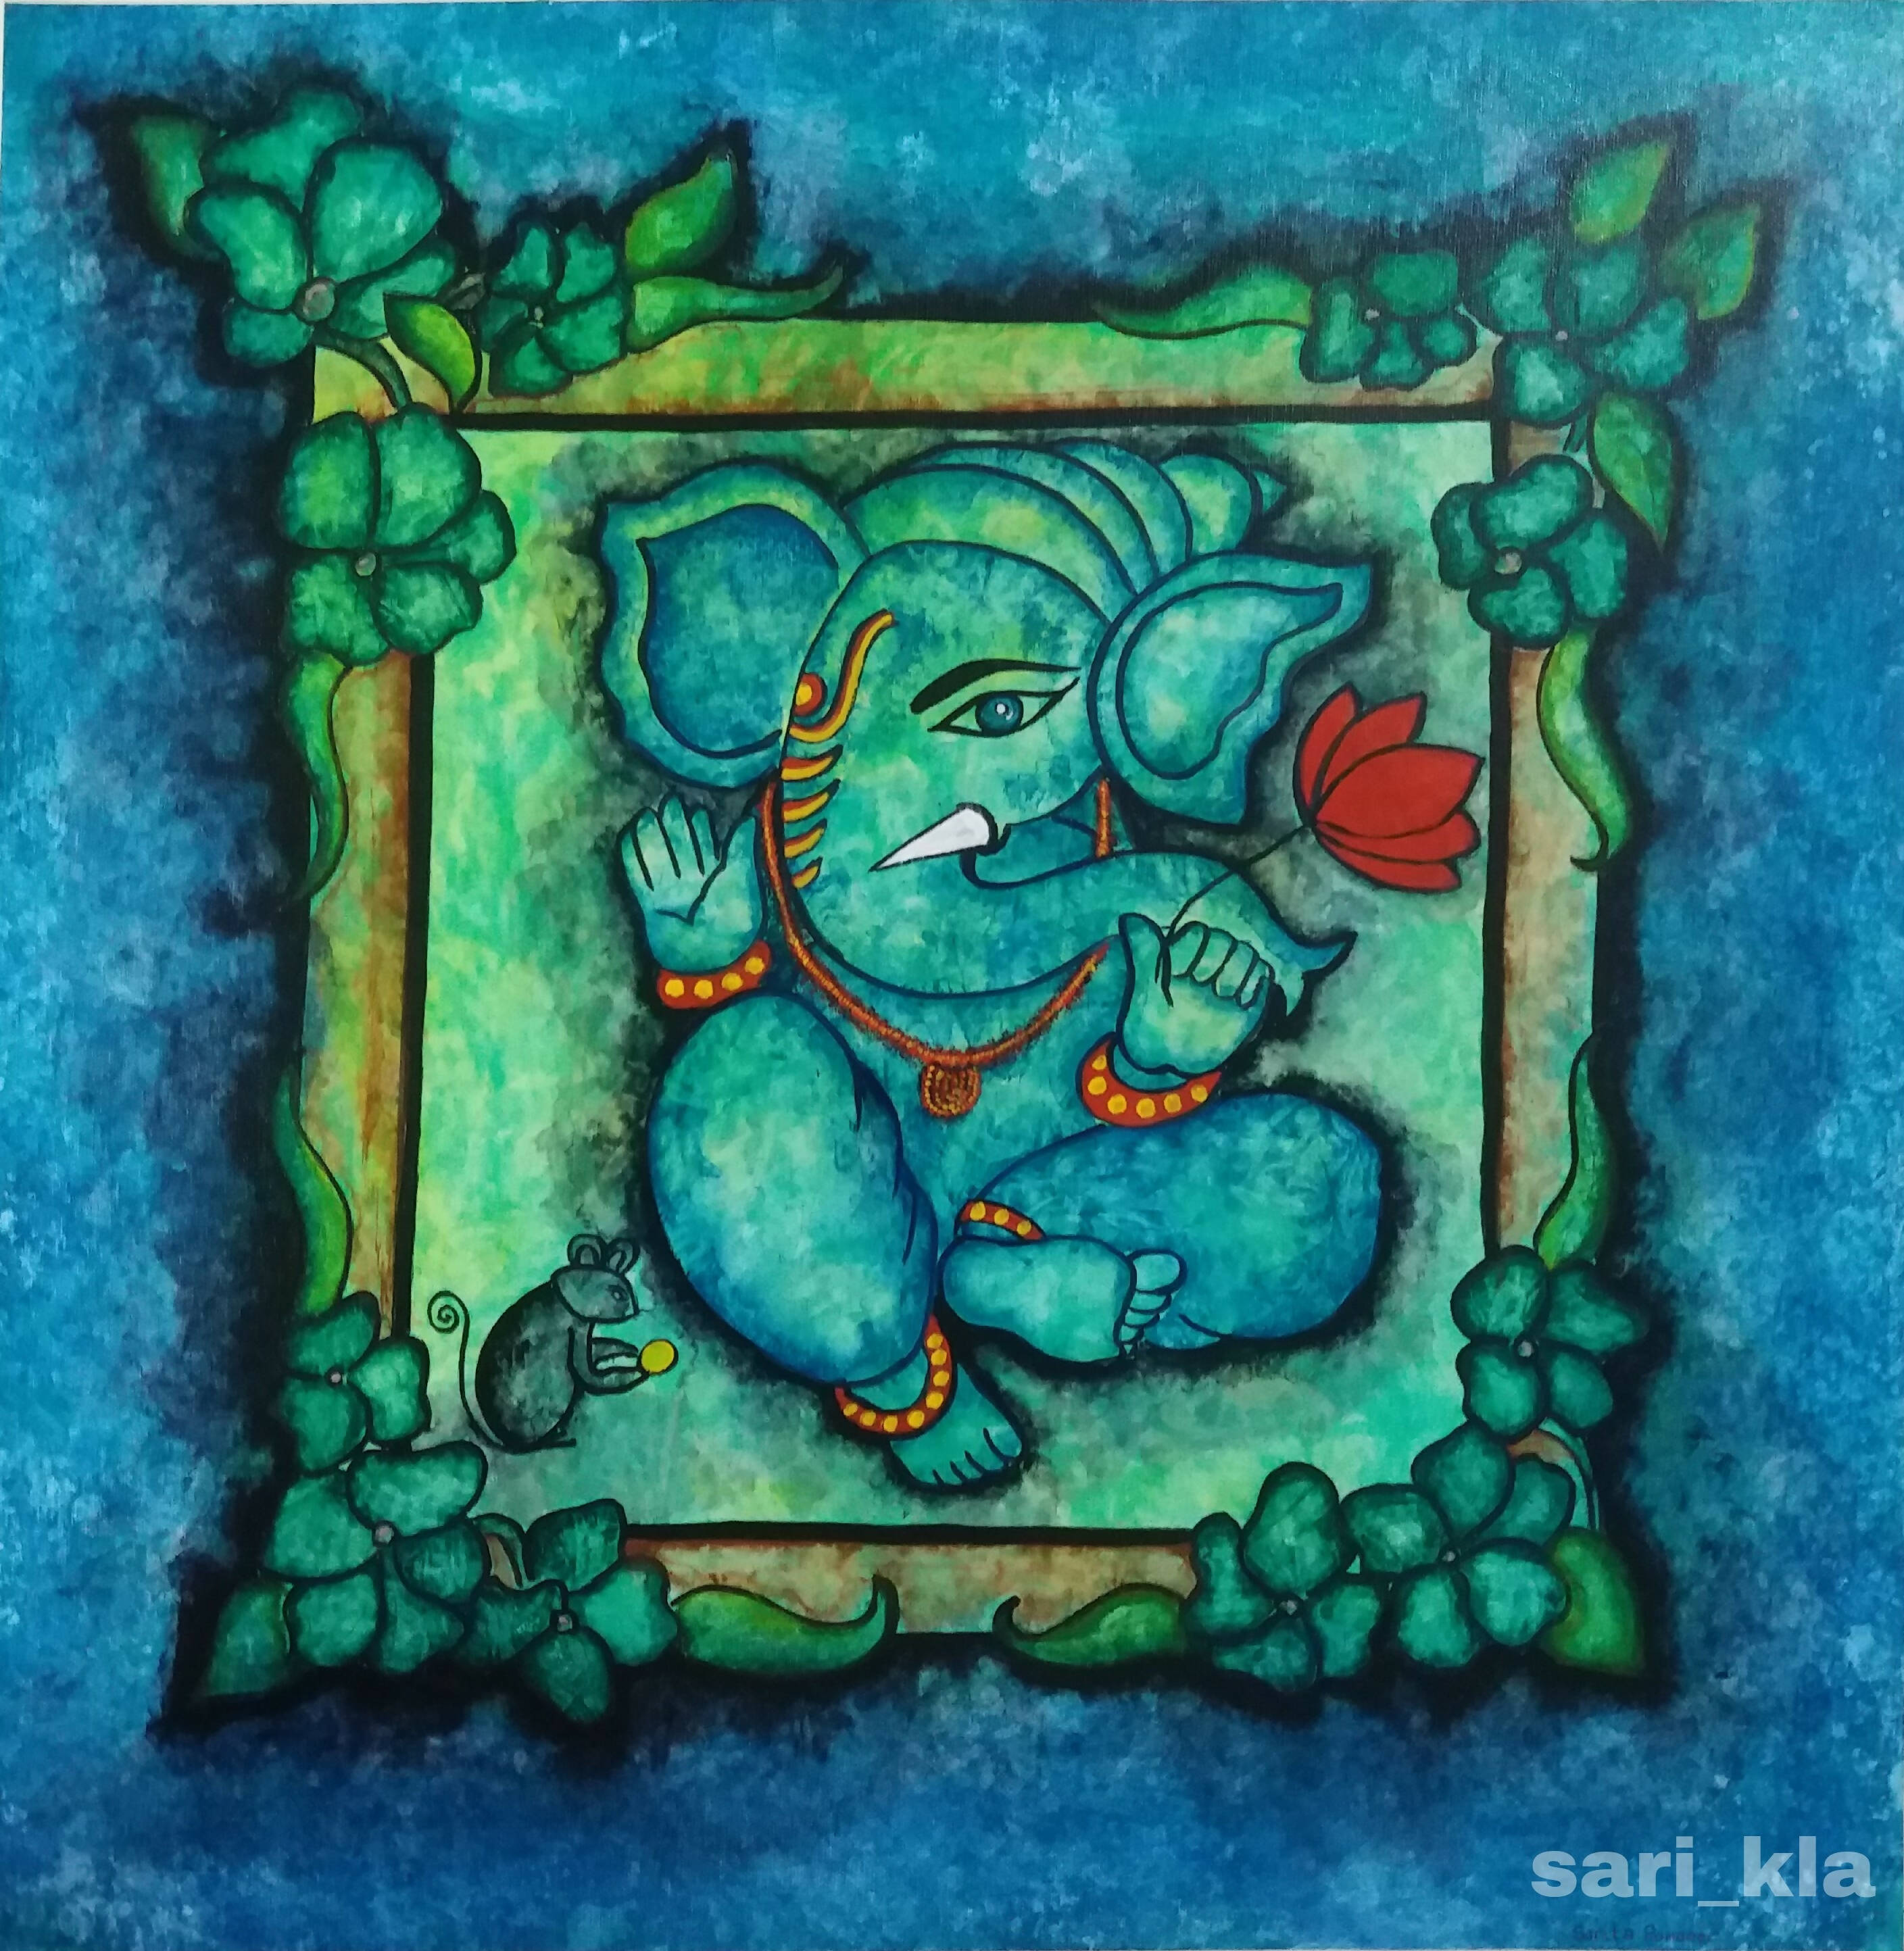 Blessing of Lord Ganesha